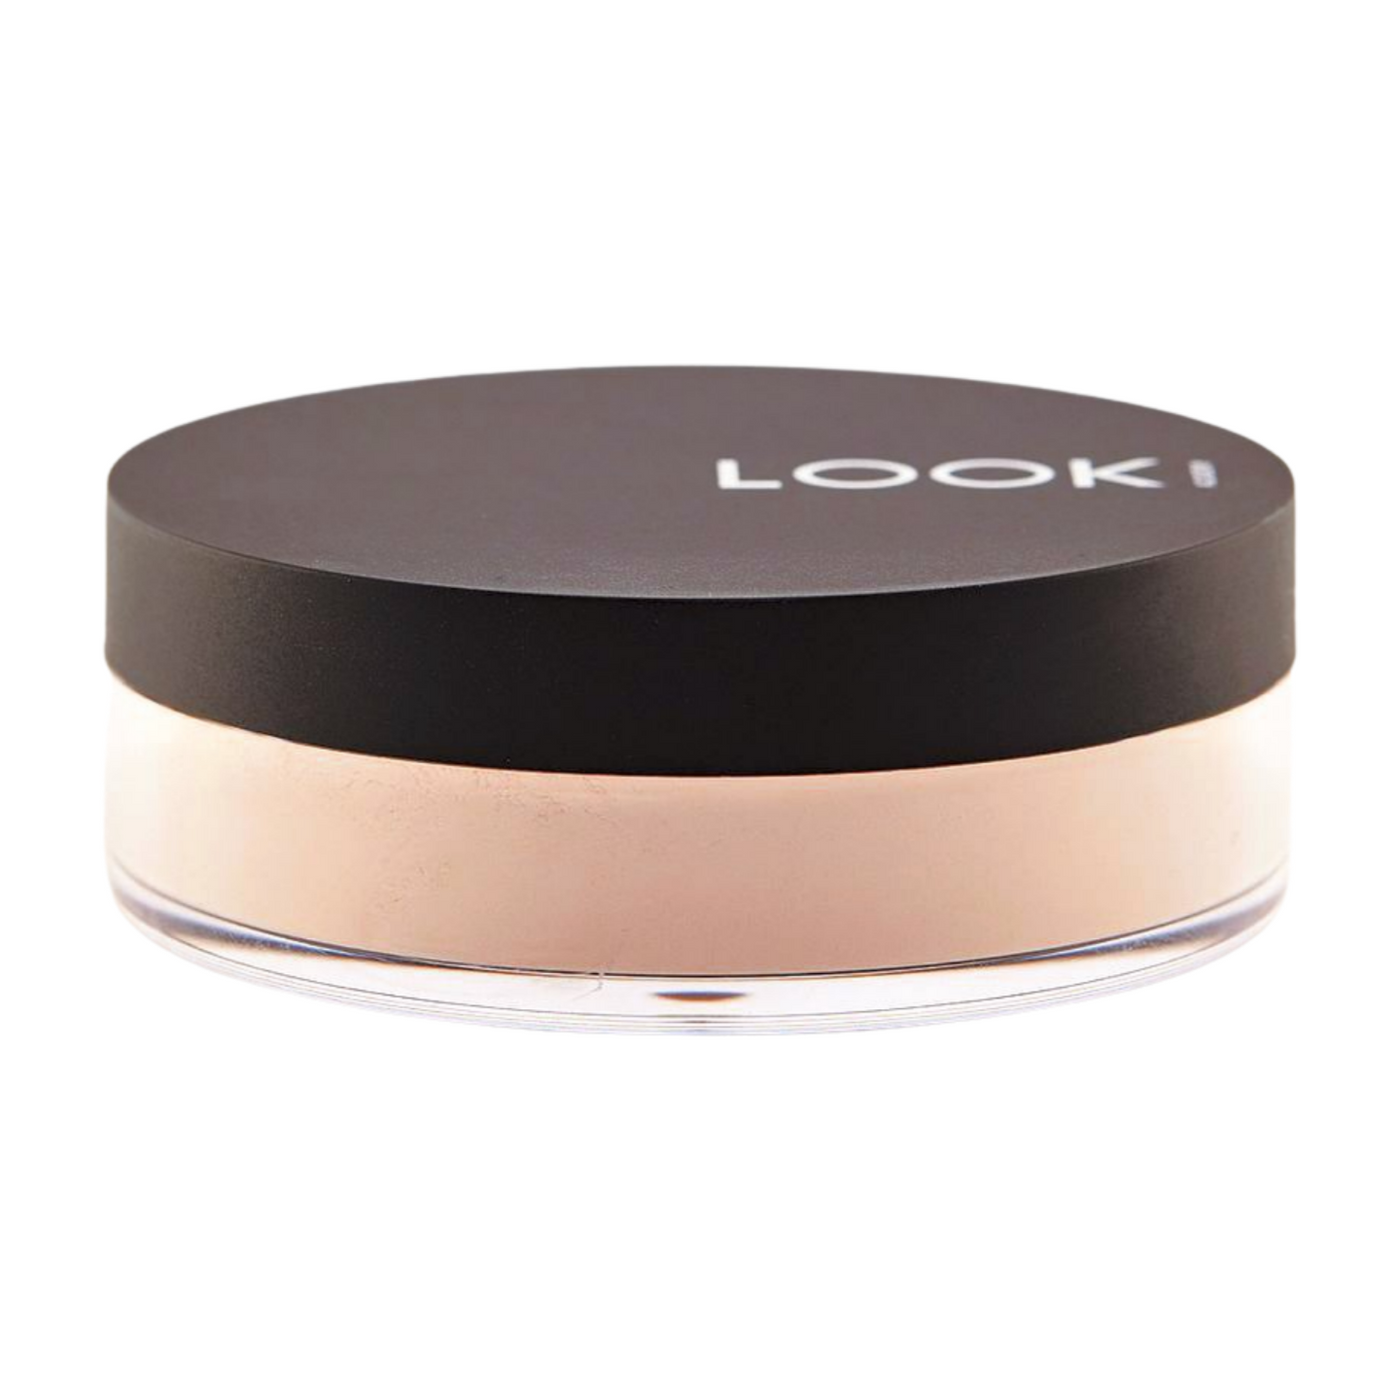 Look Academy™ Pro-Series Mineral Veil Finishing Powder